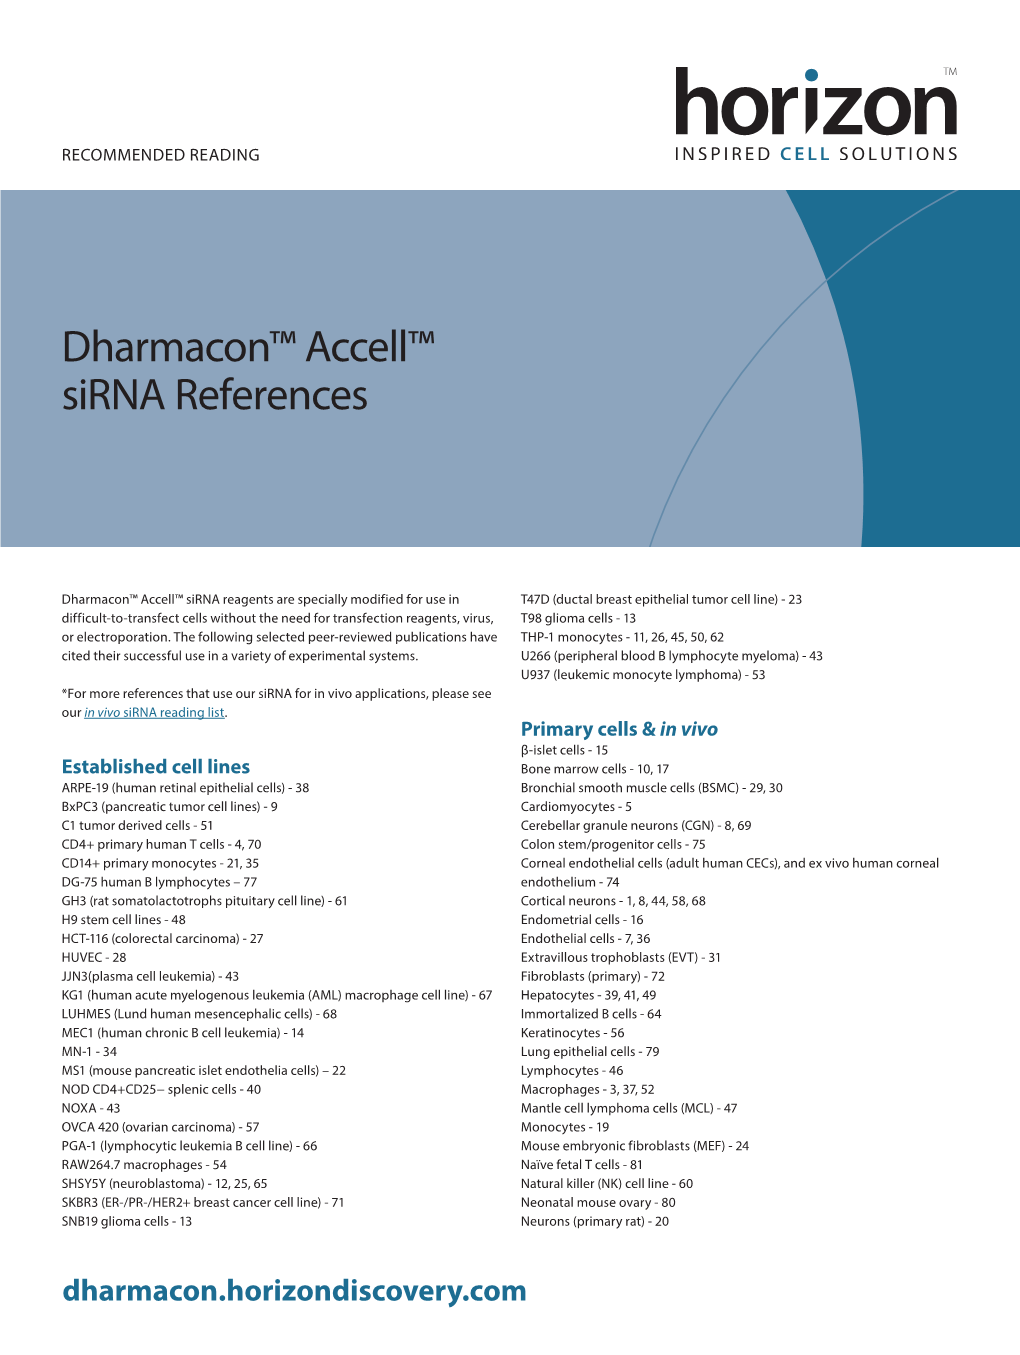 Dharmacon™ Accell™ Sirna References